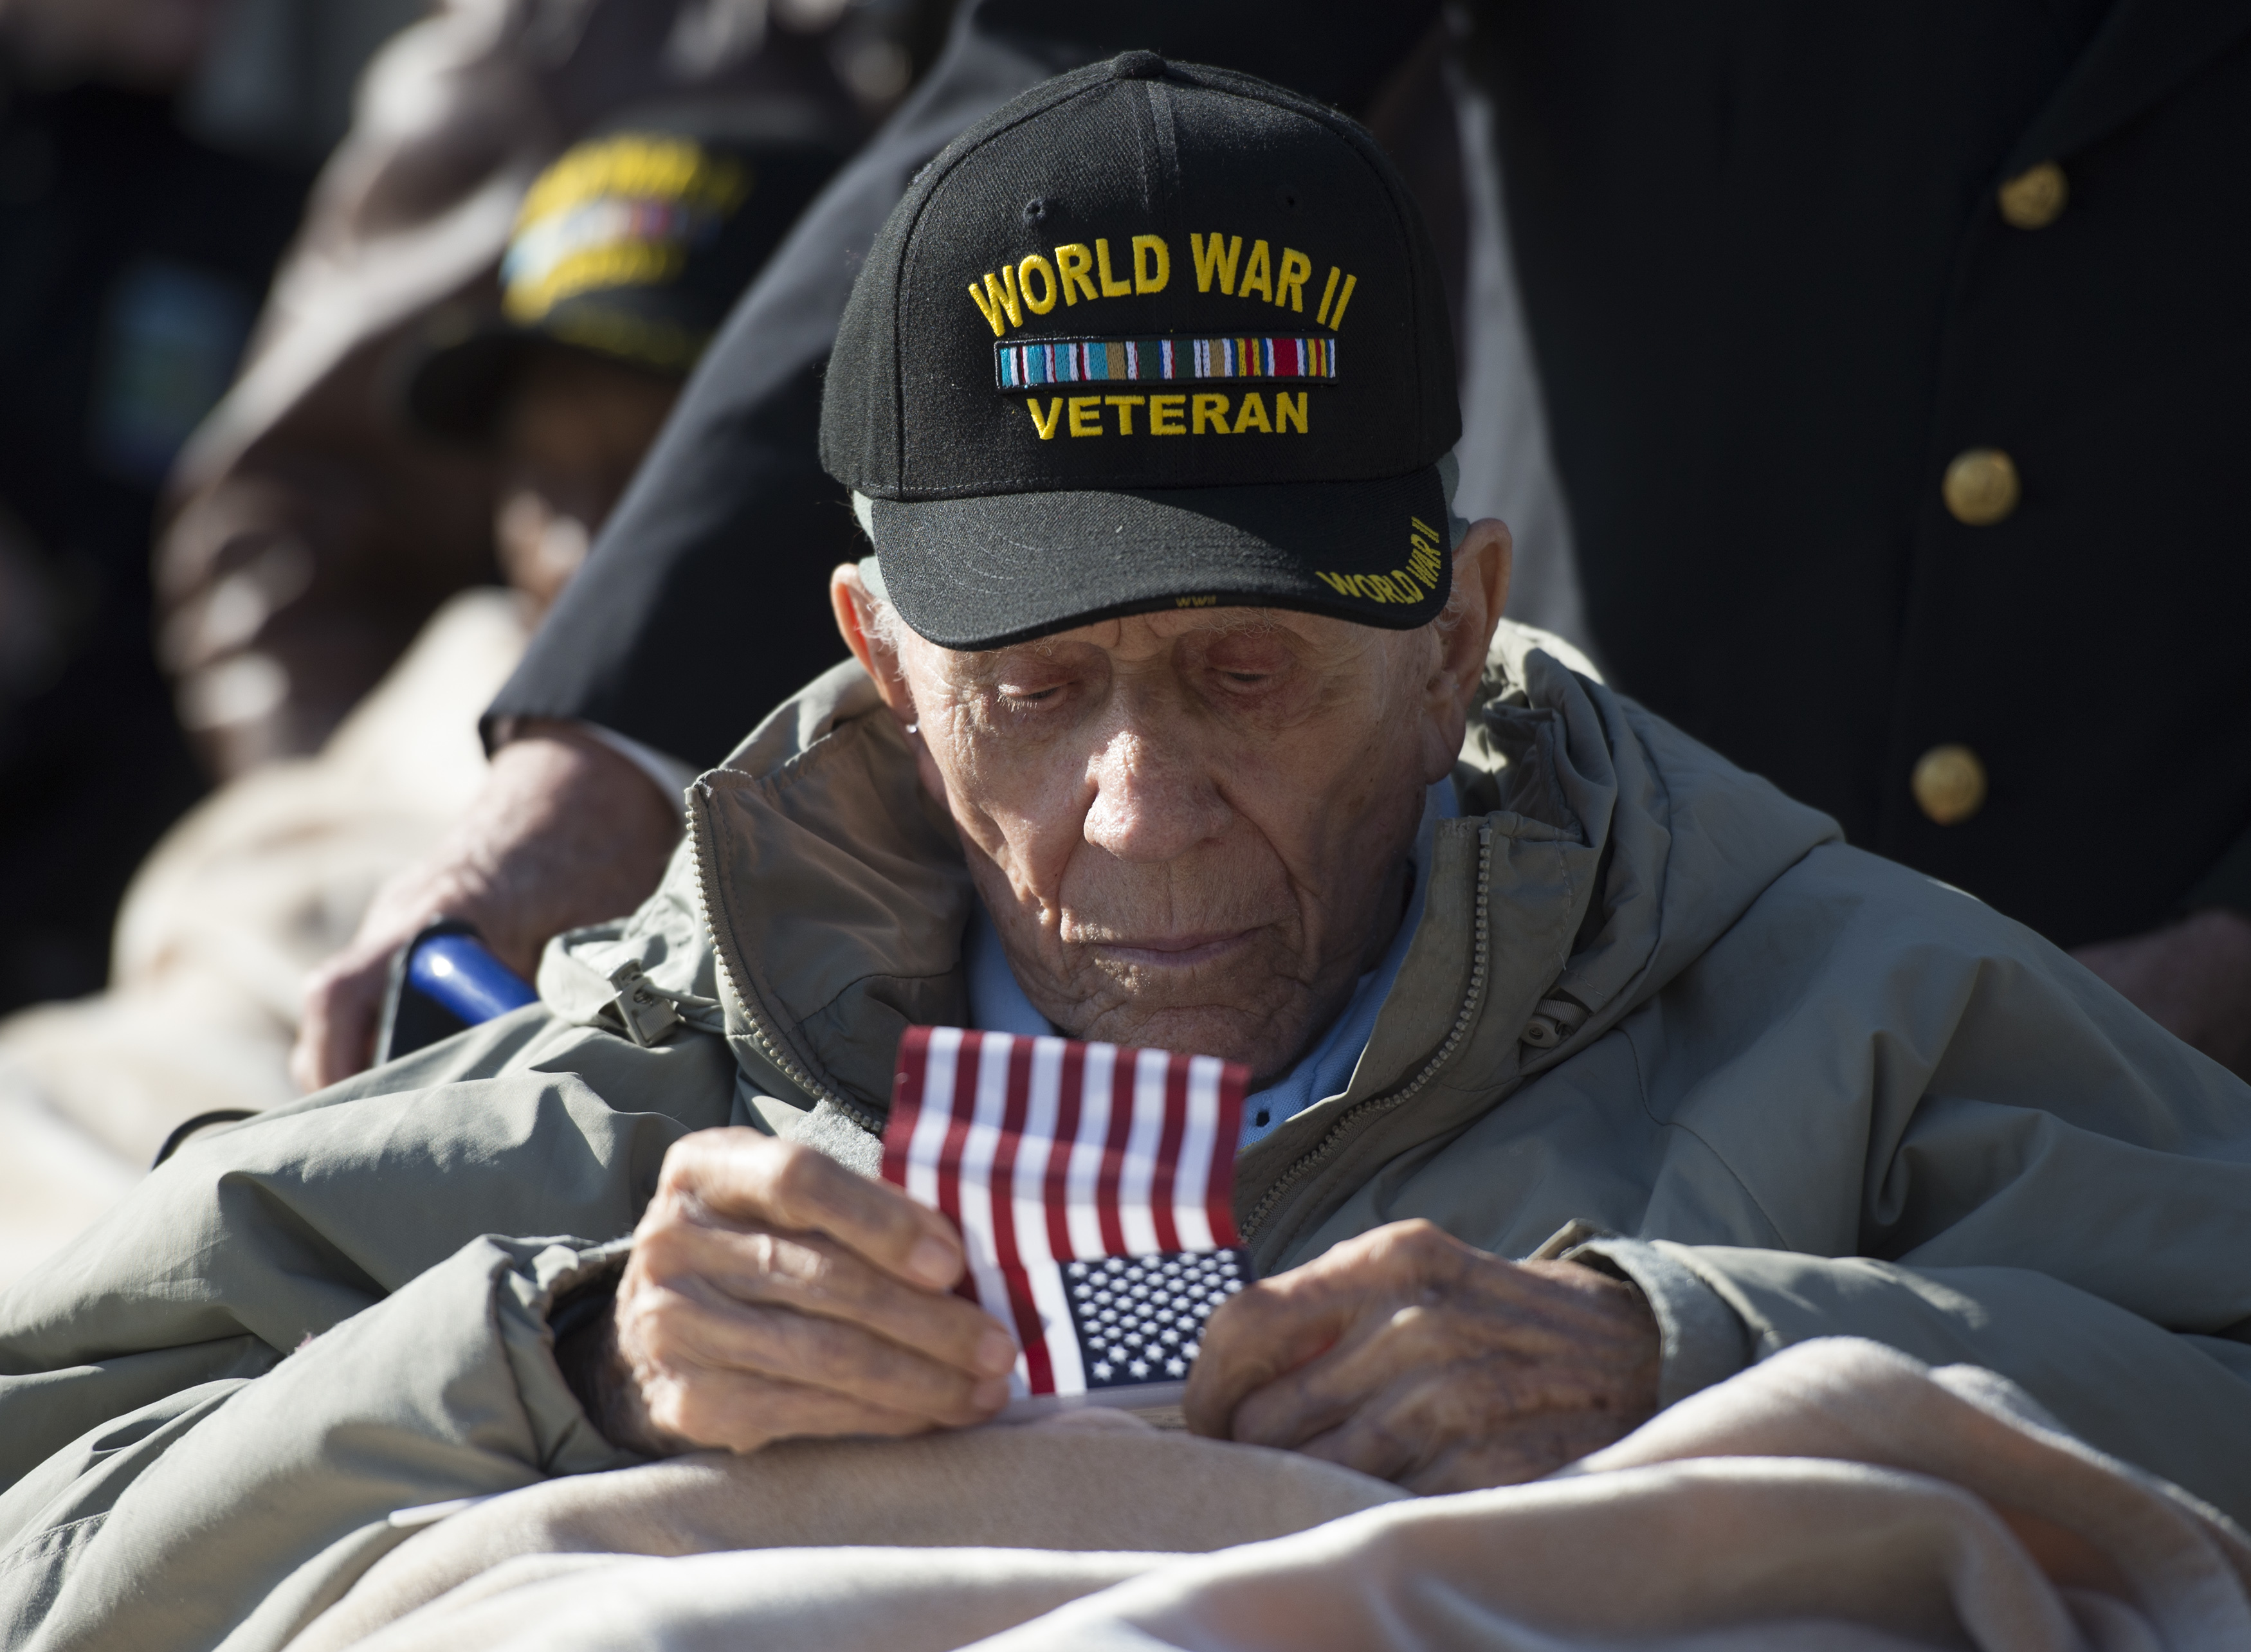 WWII veteran and Pearl Harbor survivor Casey Stevens waits to line to attend the Pearl Harbor 75th anniversary commemoration, Wednesday, Dec. 7, 2016, at the National World War II Memorial in Washington, in honor of the 2,403 men and women killed and the 1,178 wounded at Pearl Harbor 75 years ago. (AP Photo/Molly Riley)